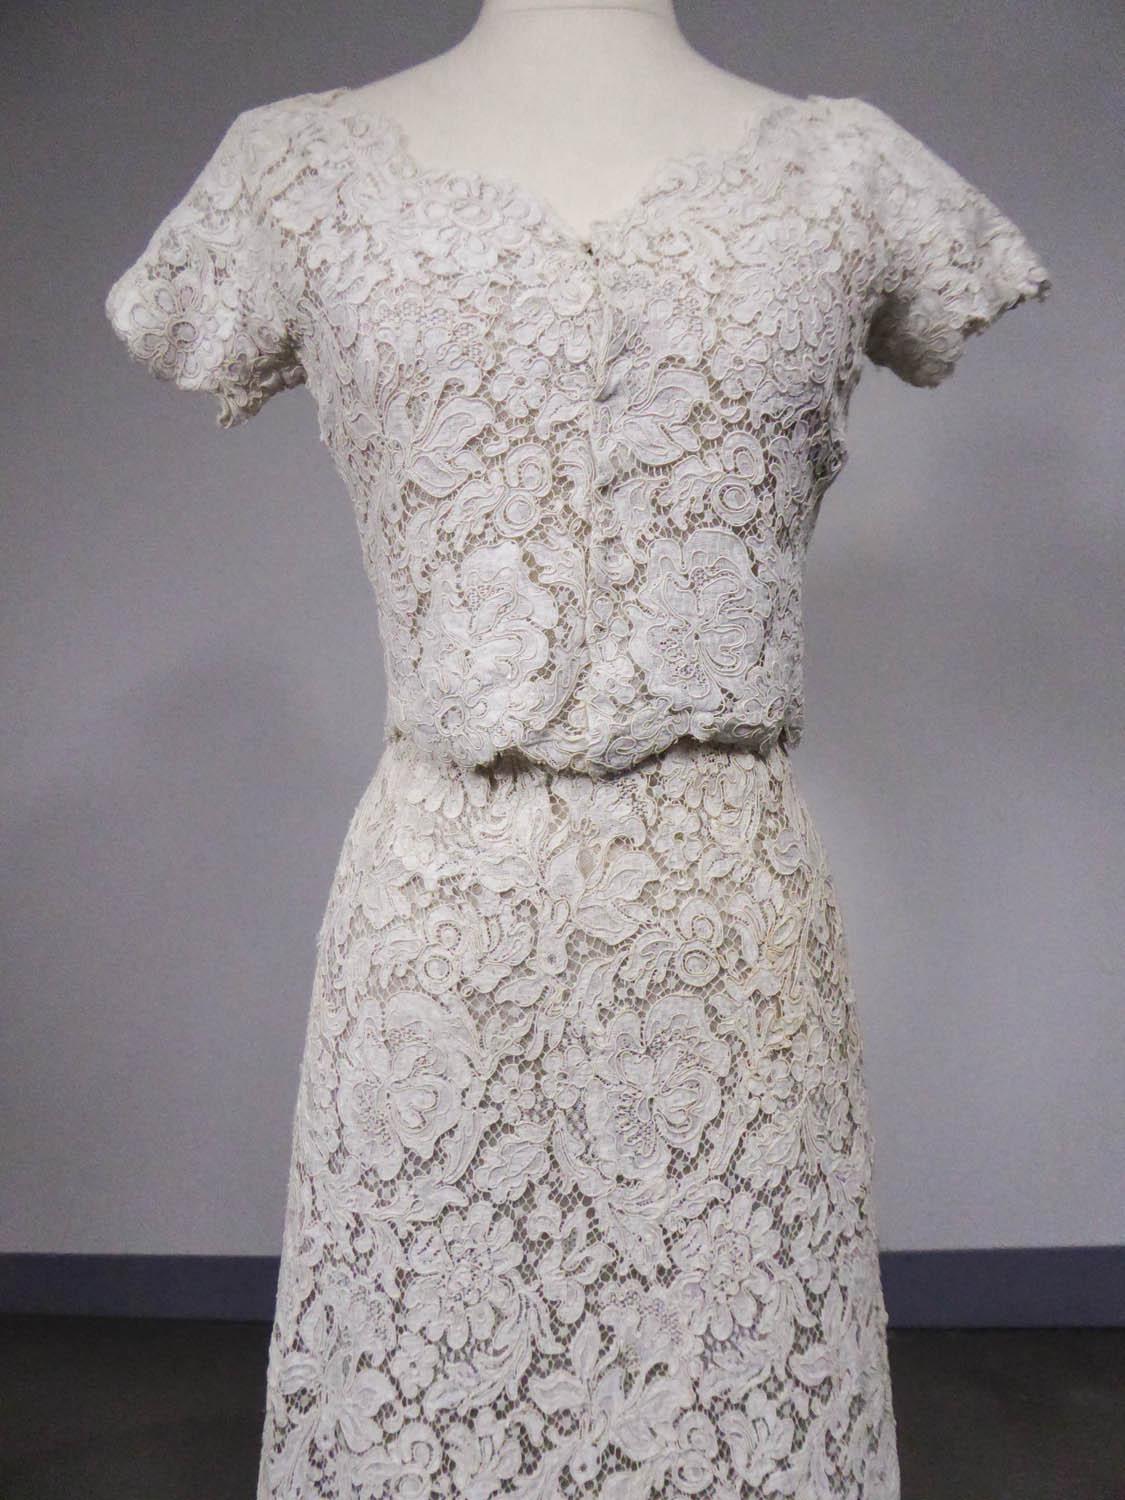 Circa 1965
France

Bolero and dress set in guipure and cream lace with floral pattern by Christian Dior dating from 1960/1965. Fitted bustier in cream tulle with high waist and thin straps fully lined with matching tulle and muslin. Flared skirt